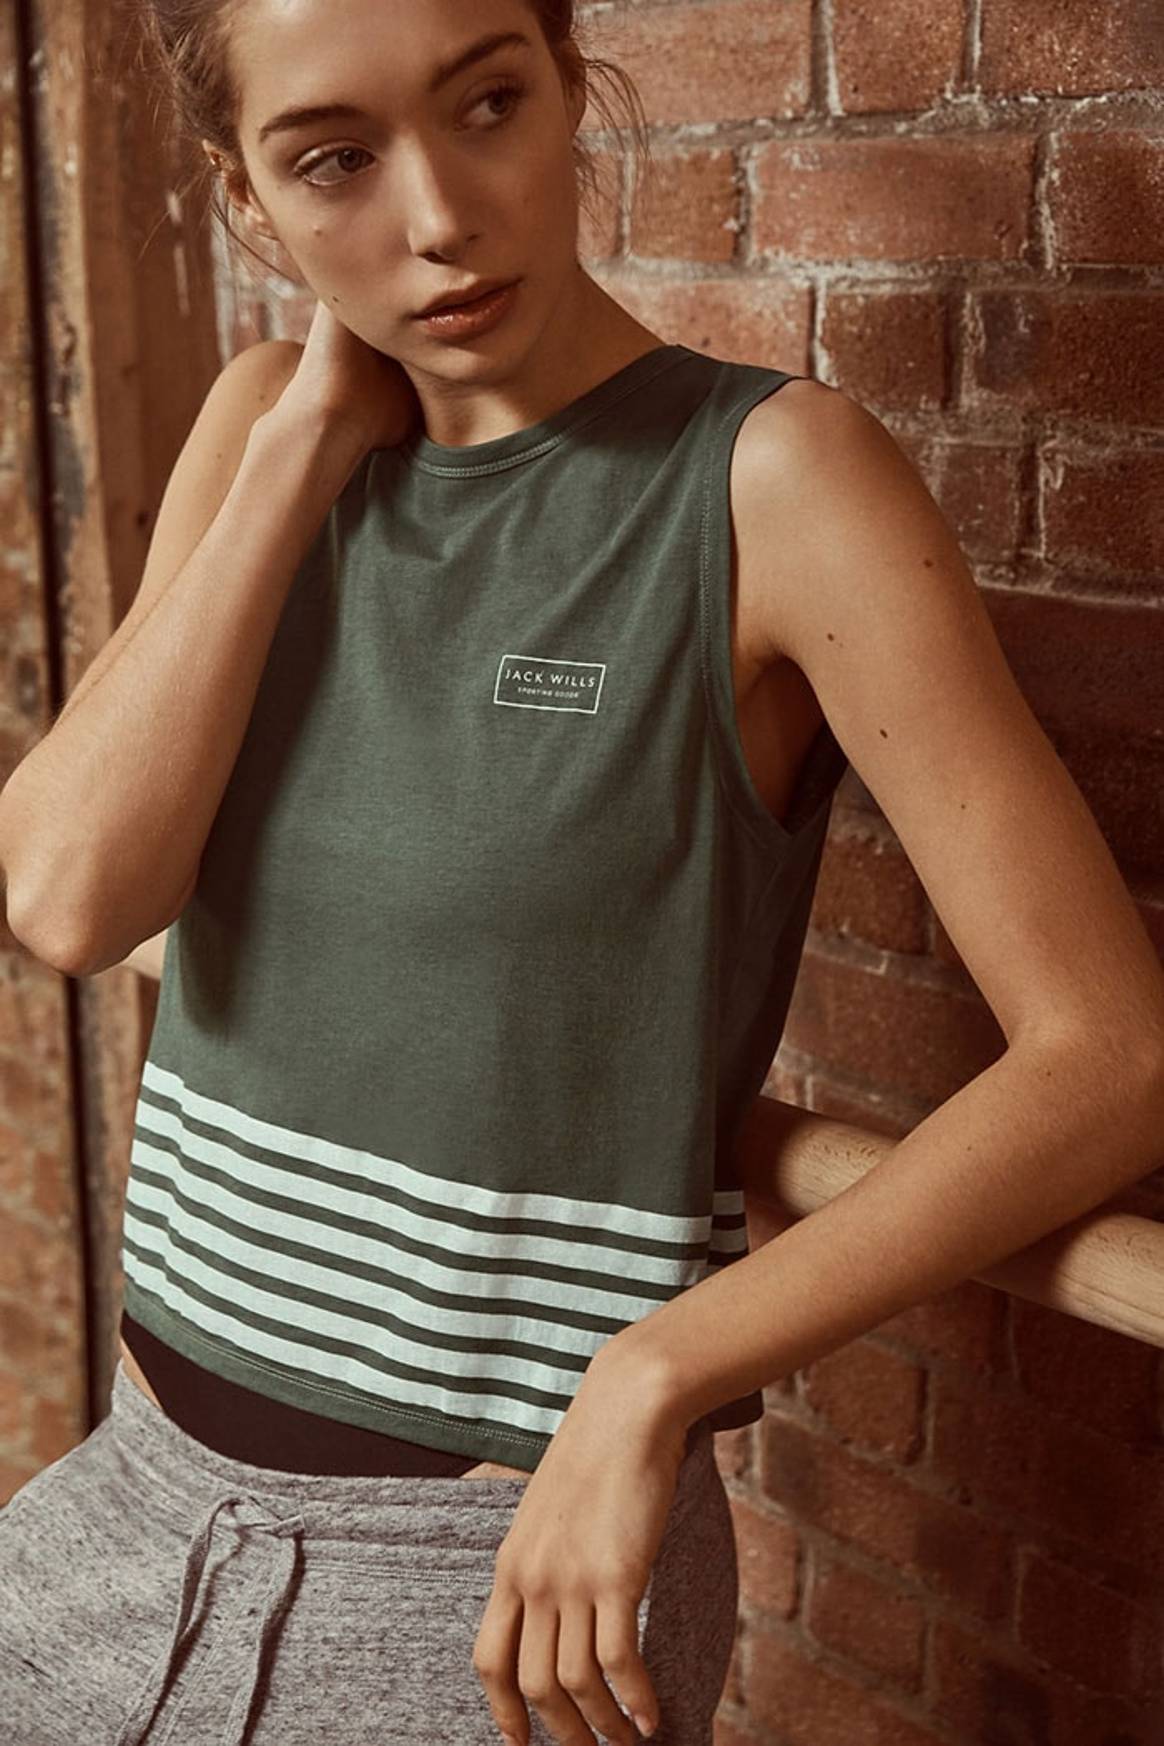 In Pictures: Jack Wills launches debut sportswear collection